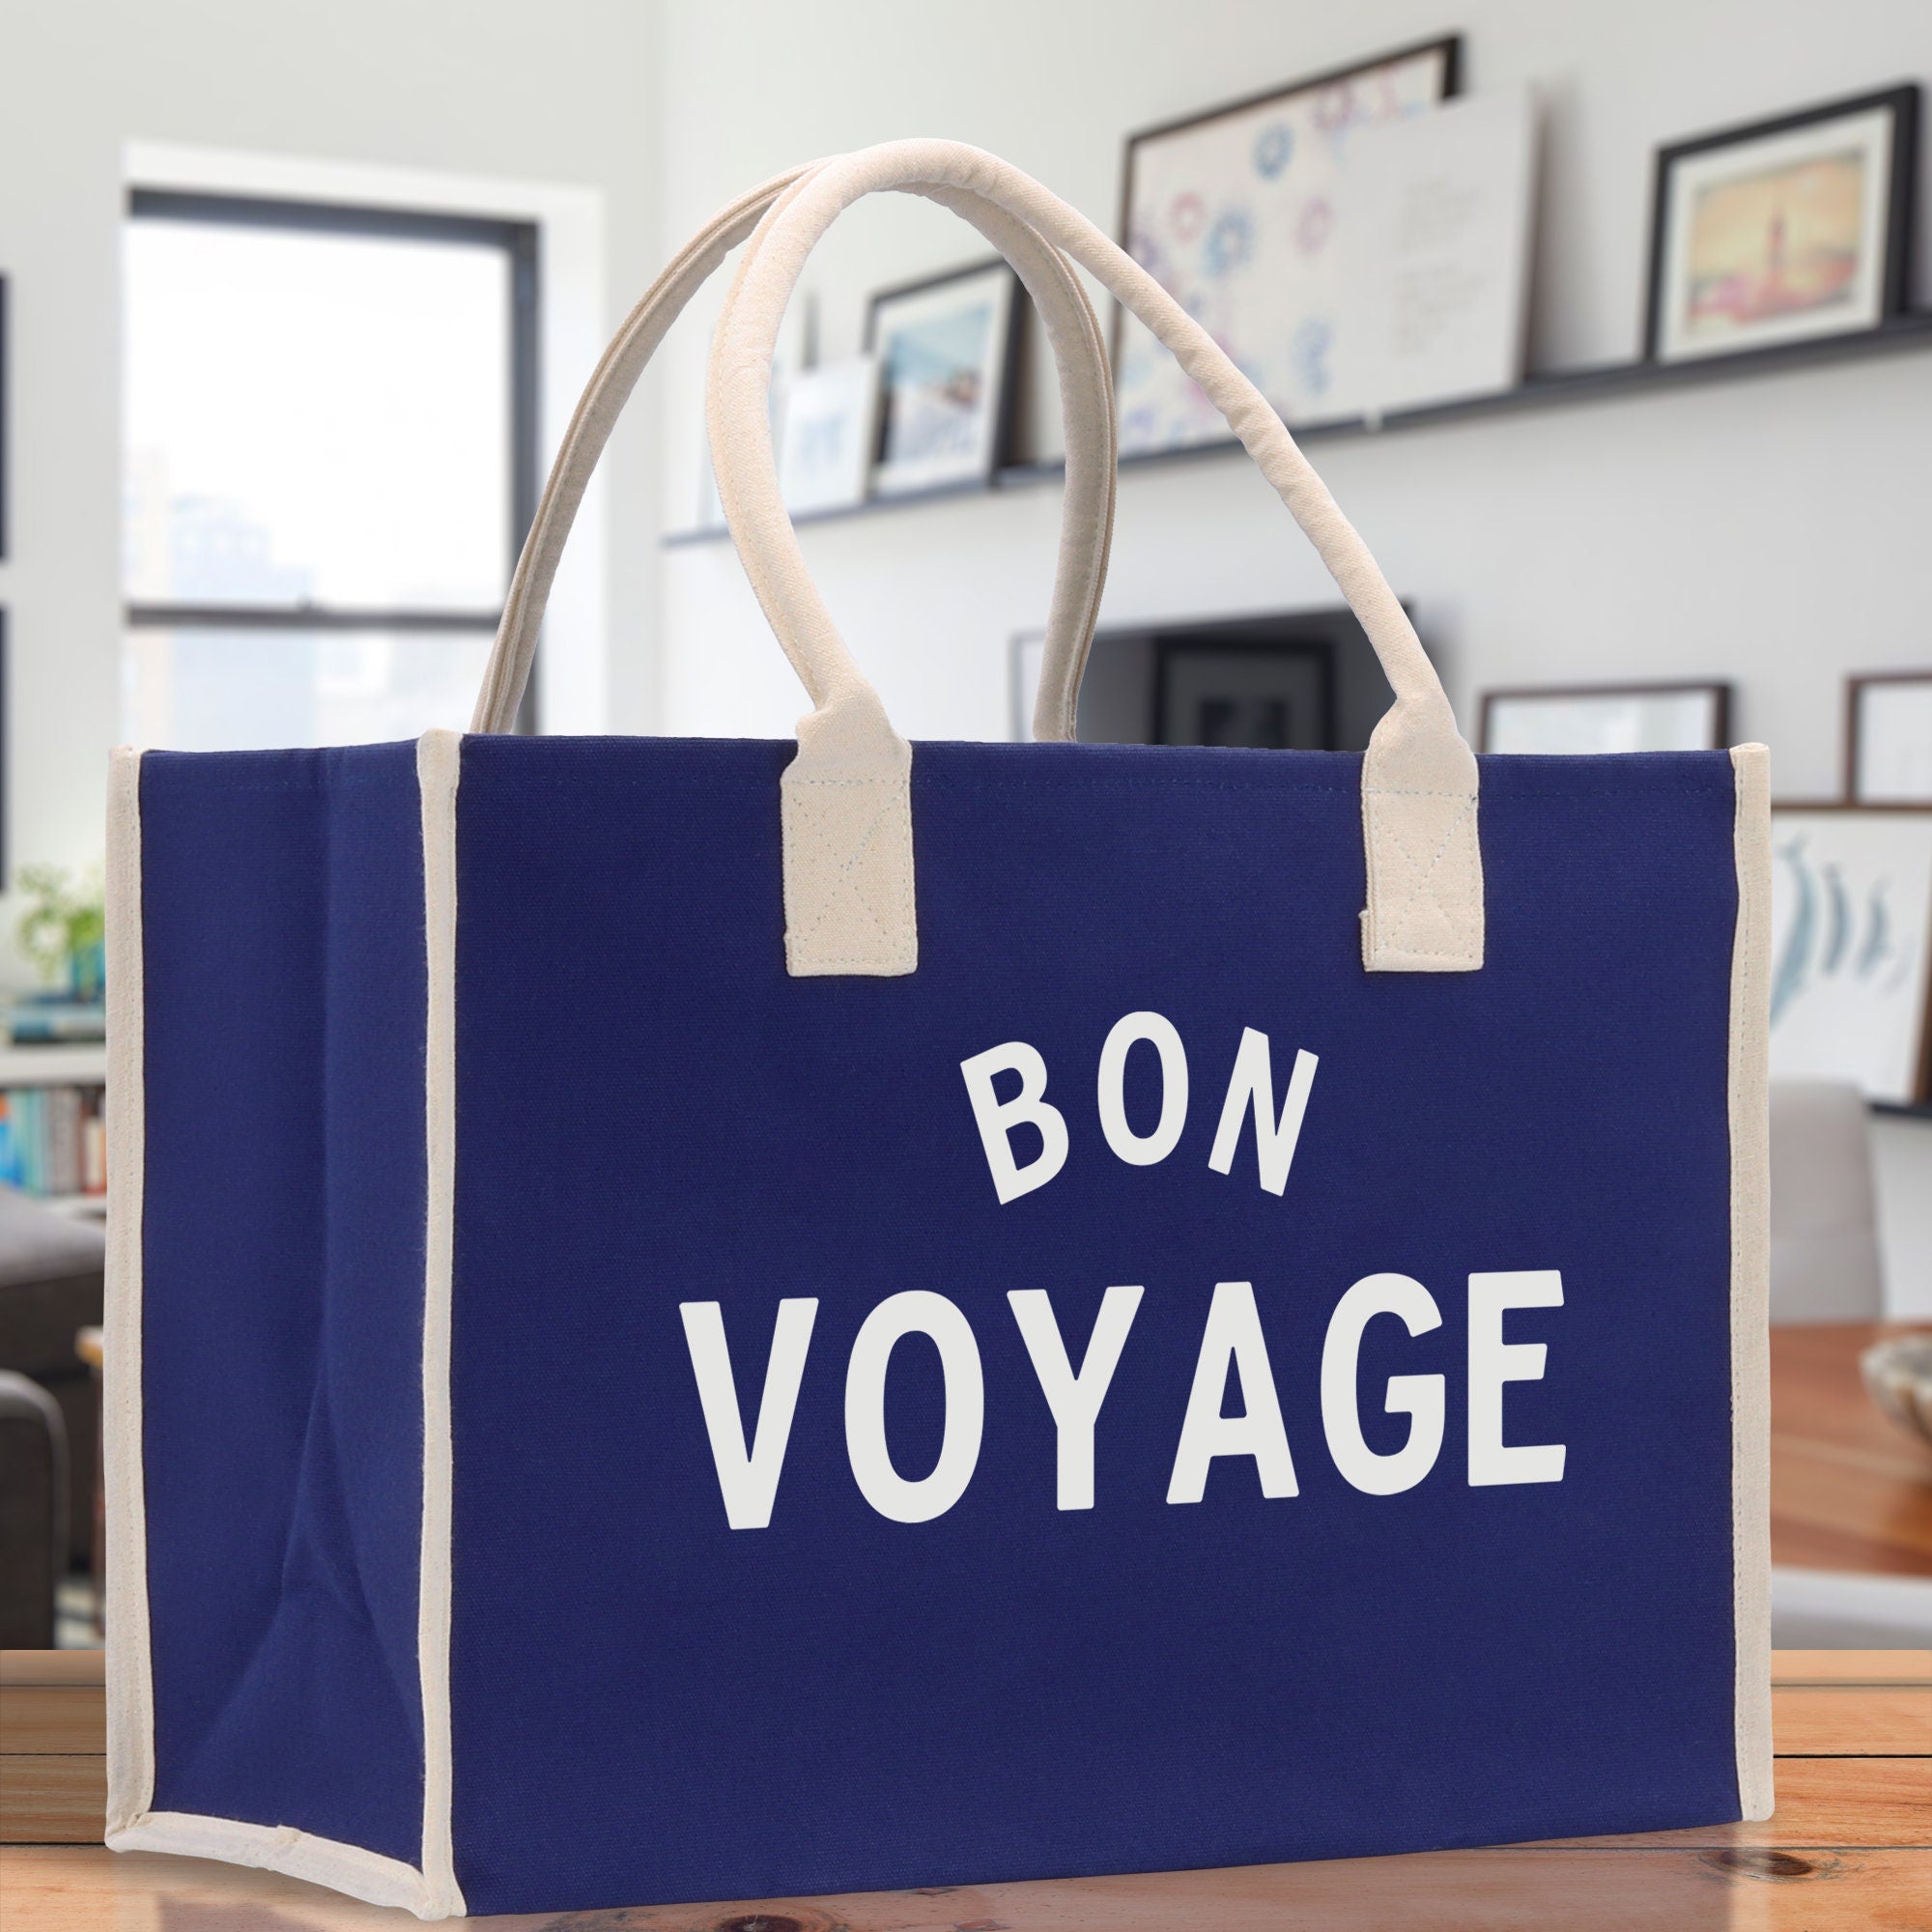 Bon Voyage Cotton Canvas Chic Beach Tote Bag Multipurpose Tote Weekender Tote Gift for Her Outdoor Tote Vacation Tote Large Beach Bag